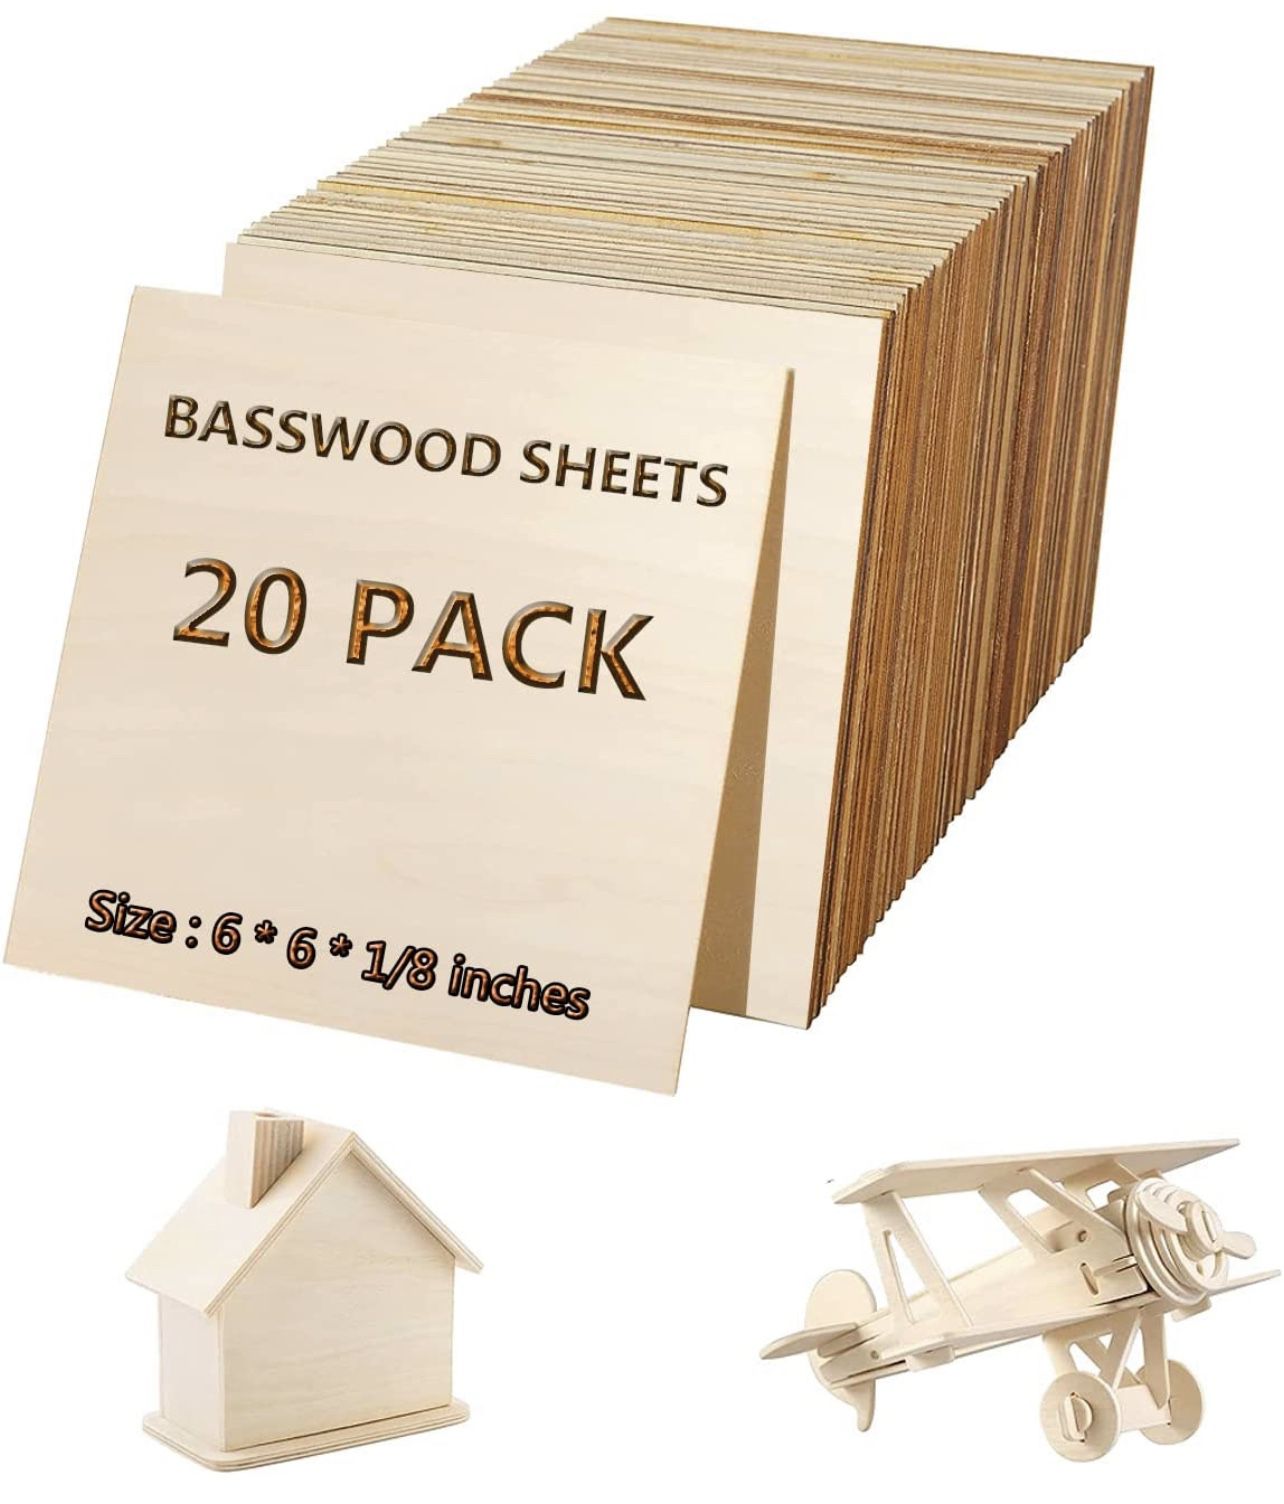 Basswood Sheets ，Unfinished Wood Pieces 20Pcs 6 x 6 x 1/8 Inch，Plywood  Board for Crafts for DIY Projects, Drawing, Painting, Laser, Wood Burning,  Scho for Sale in Queens, NY - OfferUp